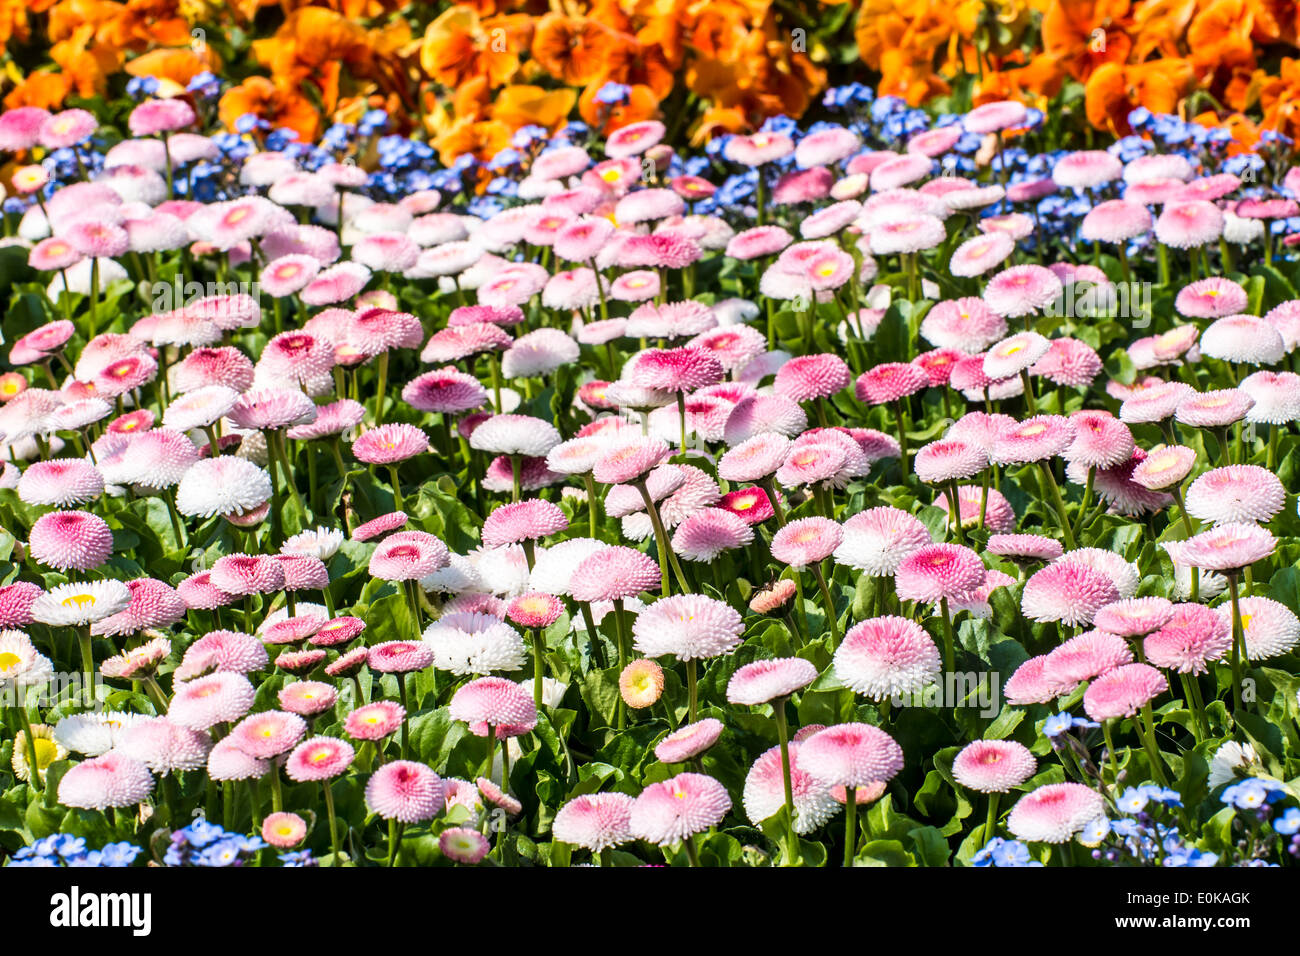 Spring garden with a carpet of bellis flowers Stock Photo